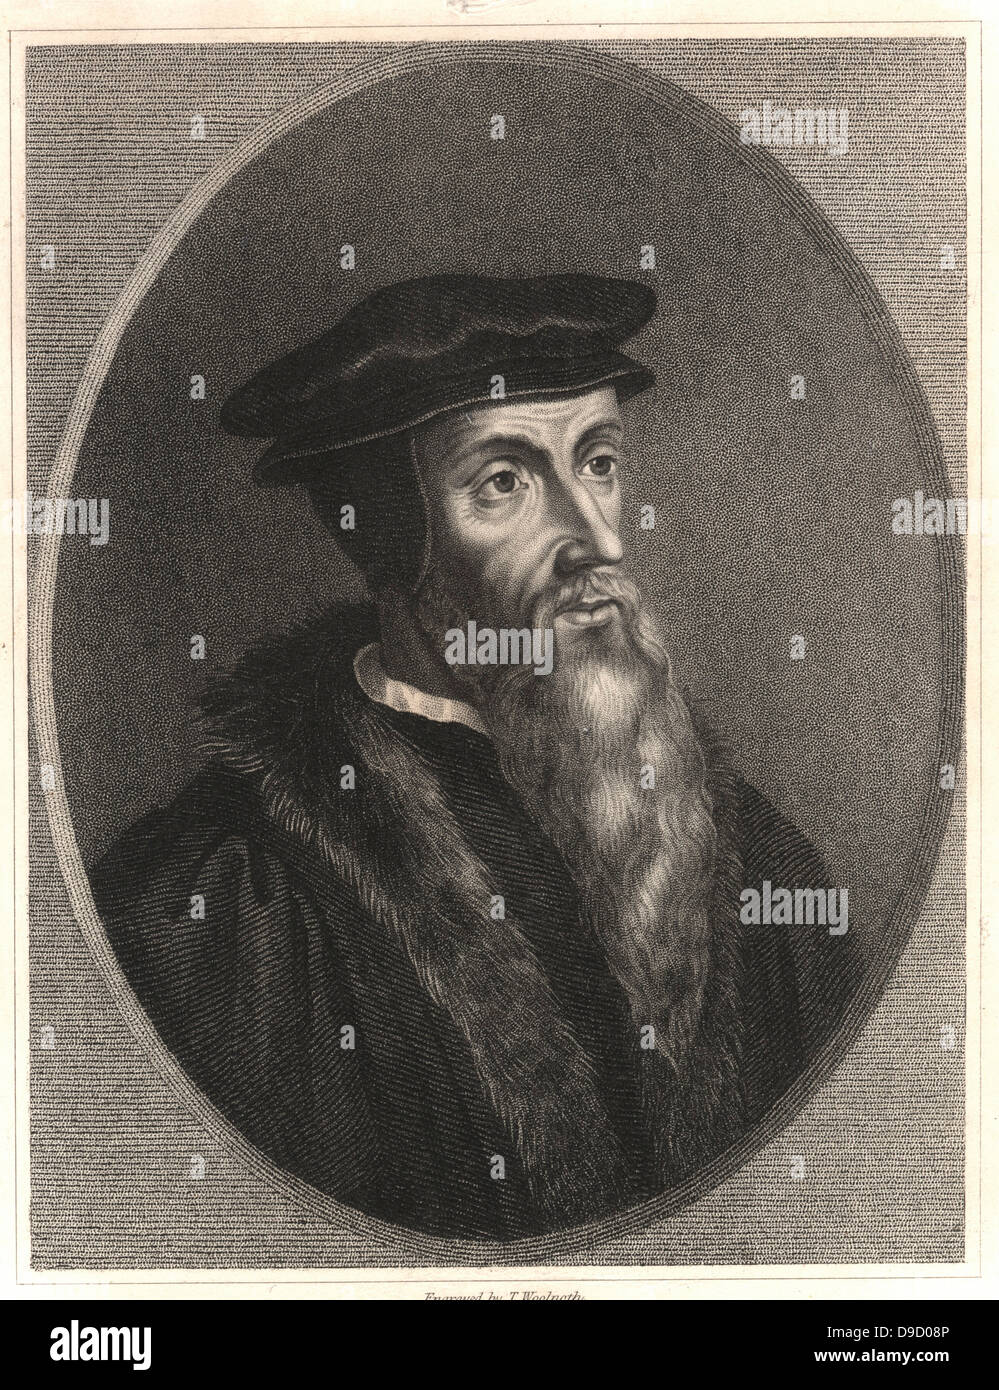 Jean Calvin (1509-1564) influential French Christian theologian and pastor of the Protestant Reformation. Settled in Geneva, Switzerland in 1541 and practised the branch of religion which bears his name, Calvinism. Stock Photo